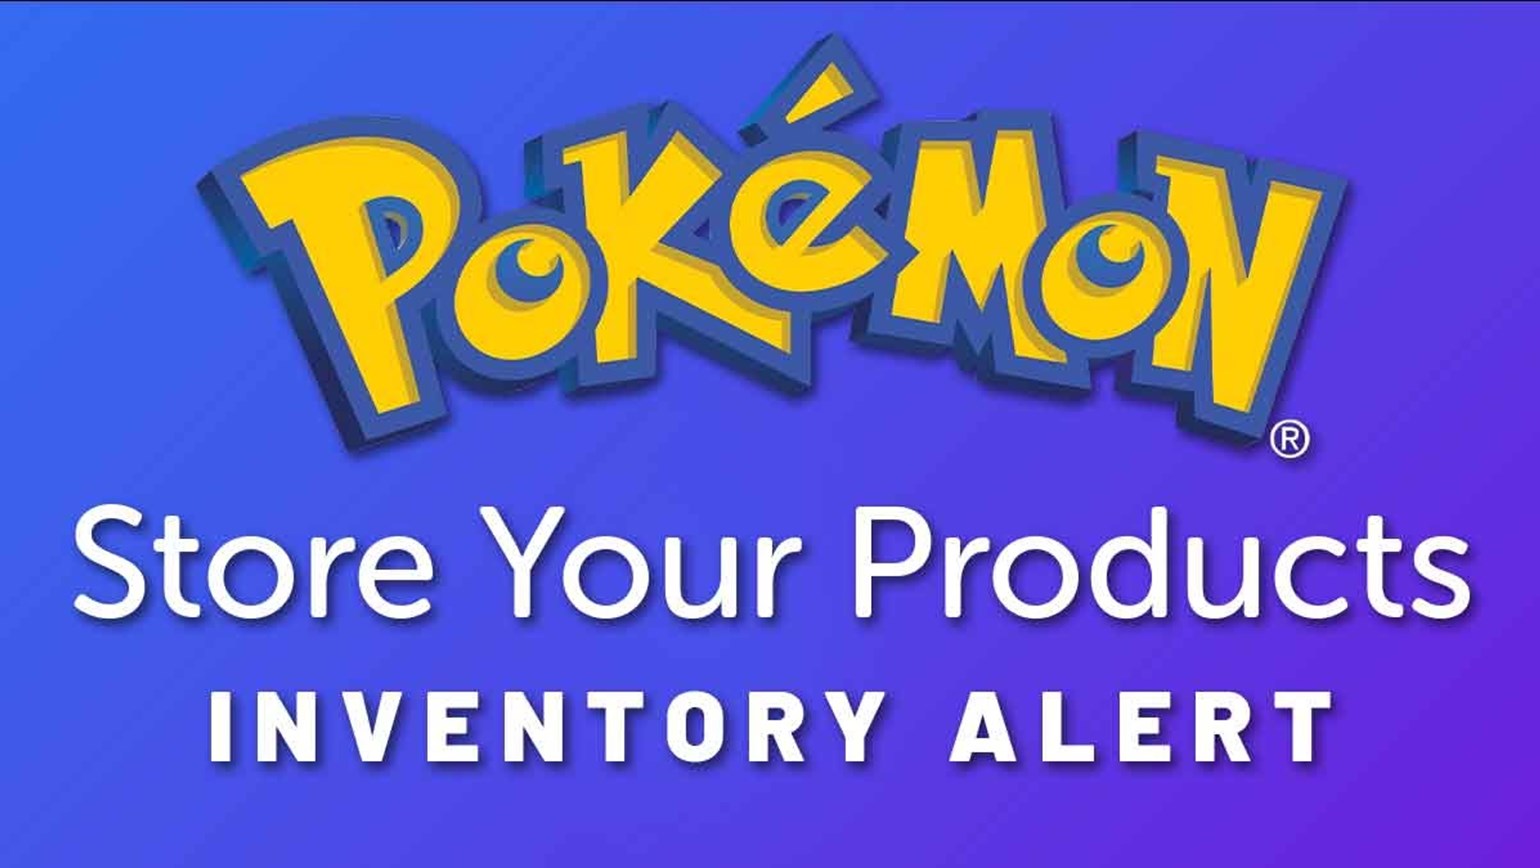 We’ve Added More Pokémon To Store Your Products